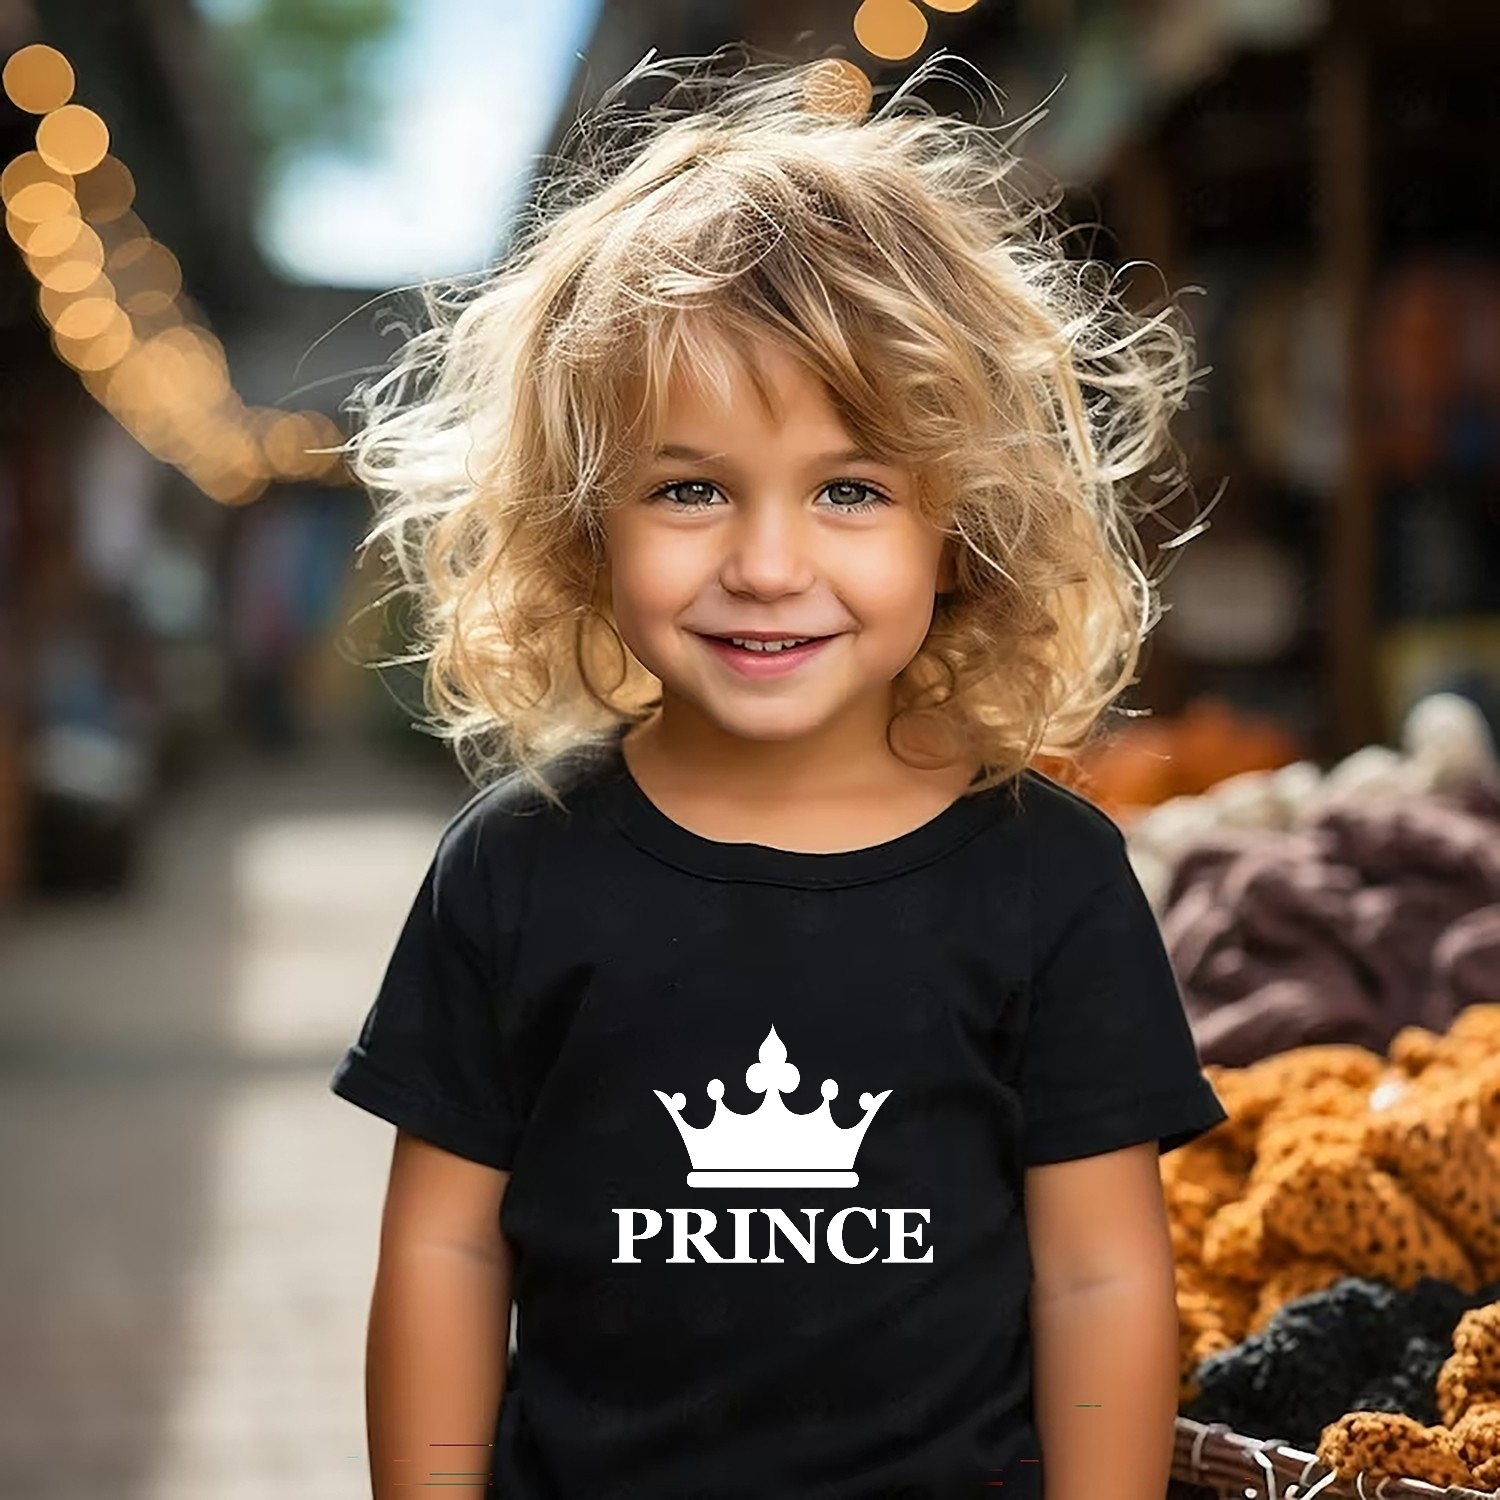 Crown King-Queen-Prinss-Prince T-shirt